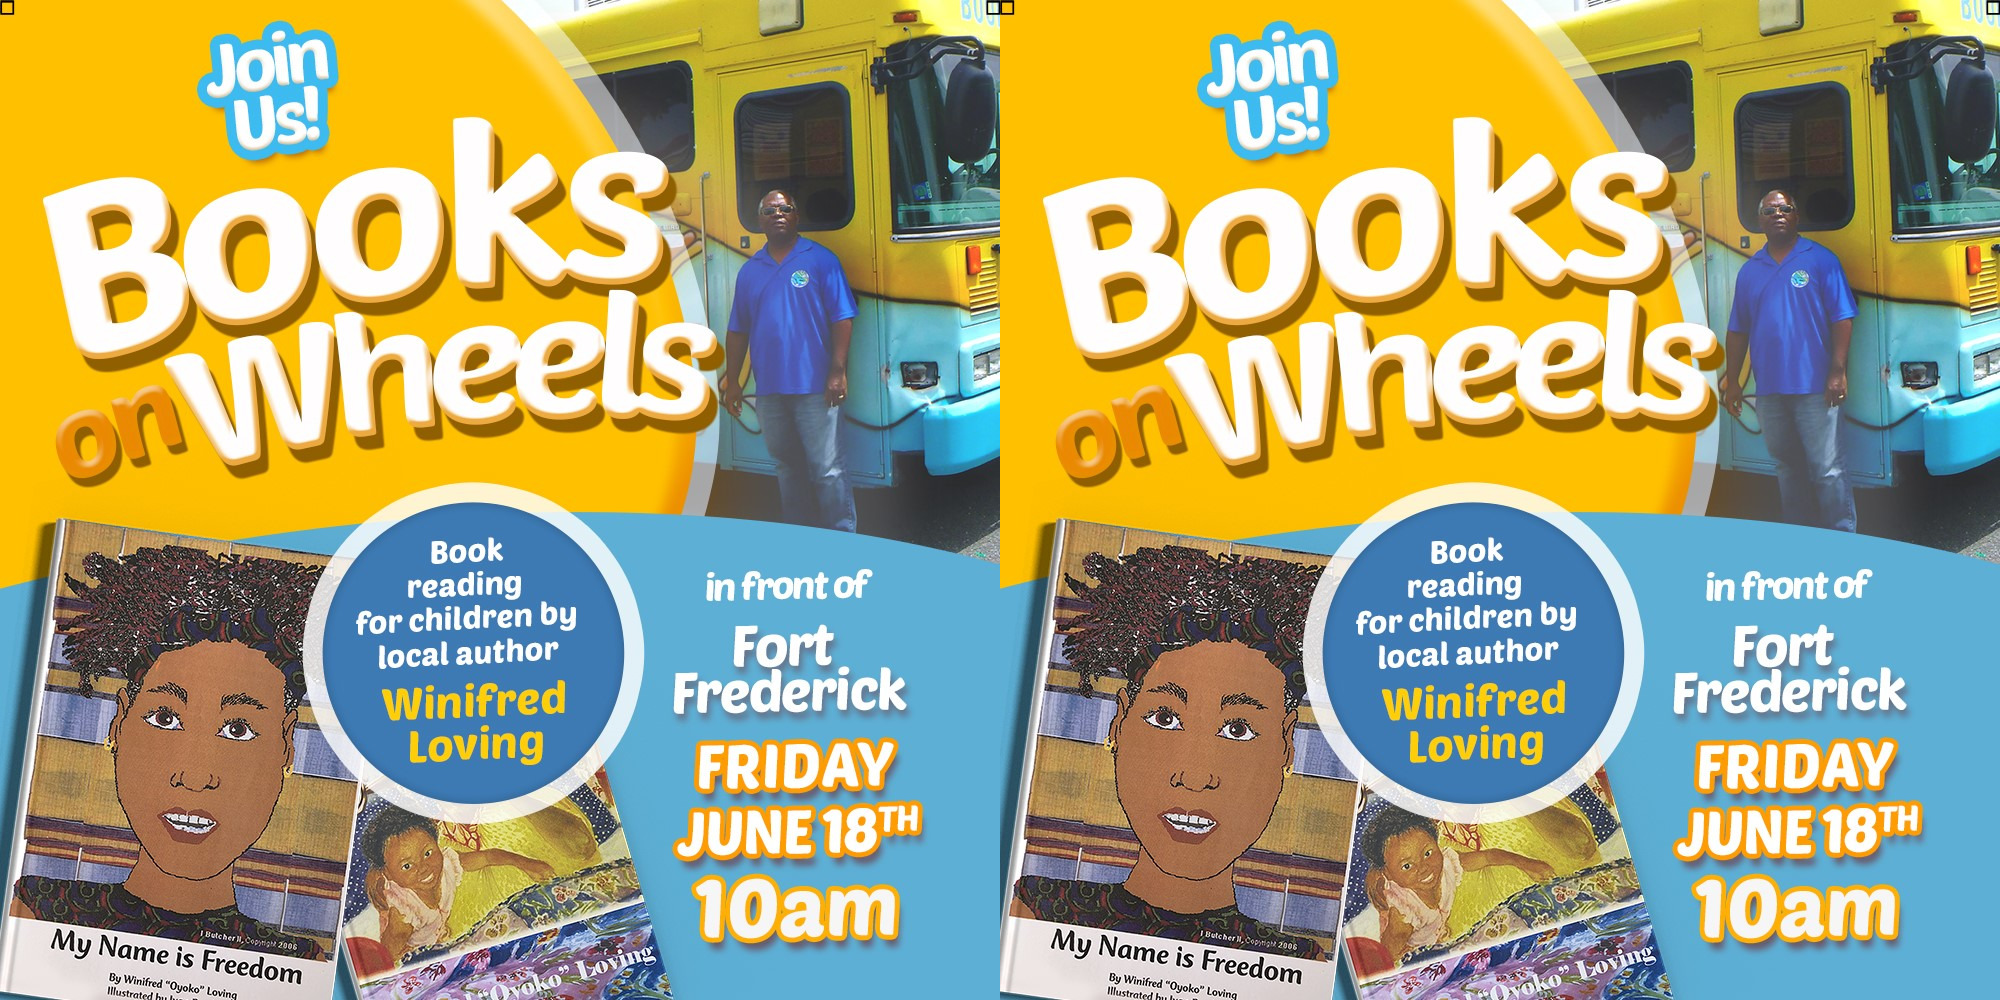 DPNR Launches Story Time Hour On Wheels For Kids Starting On Friday